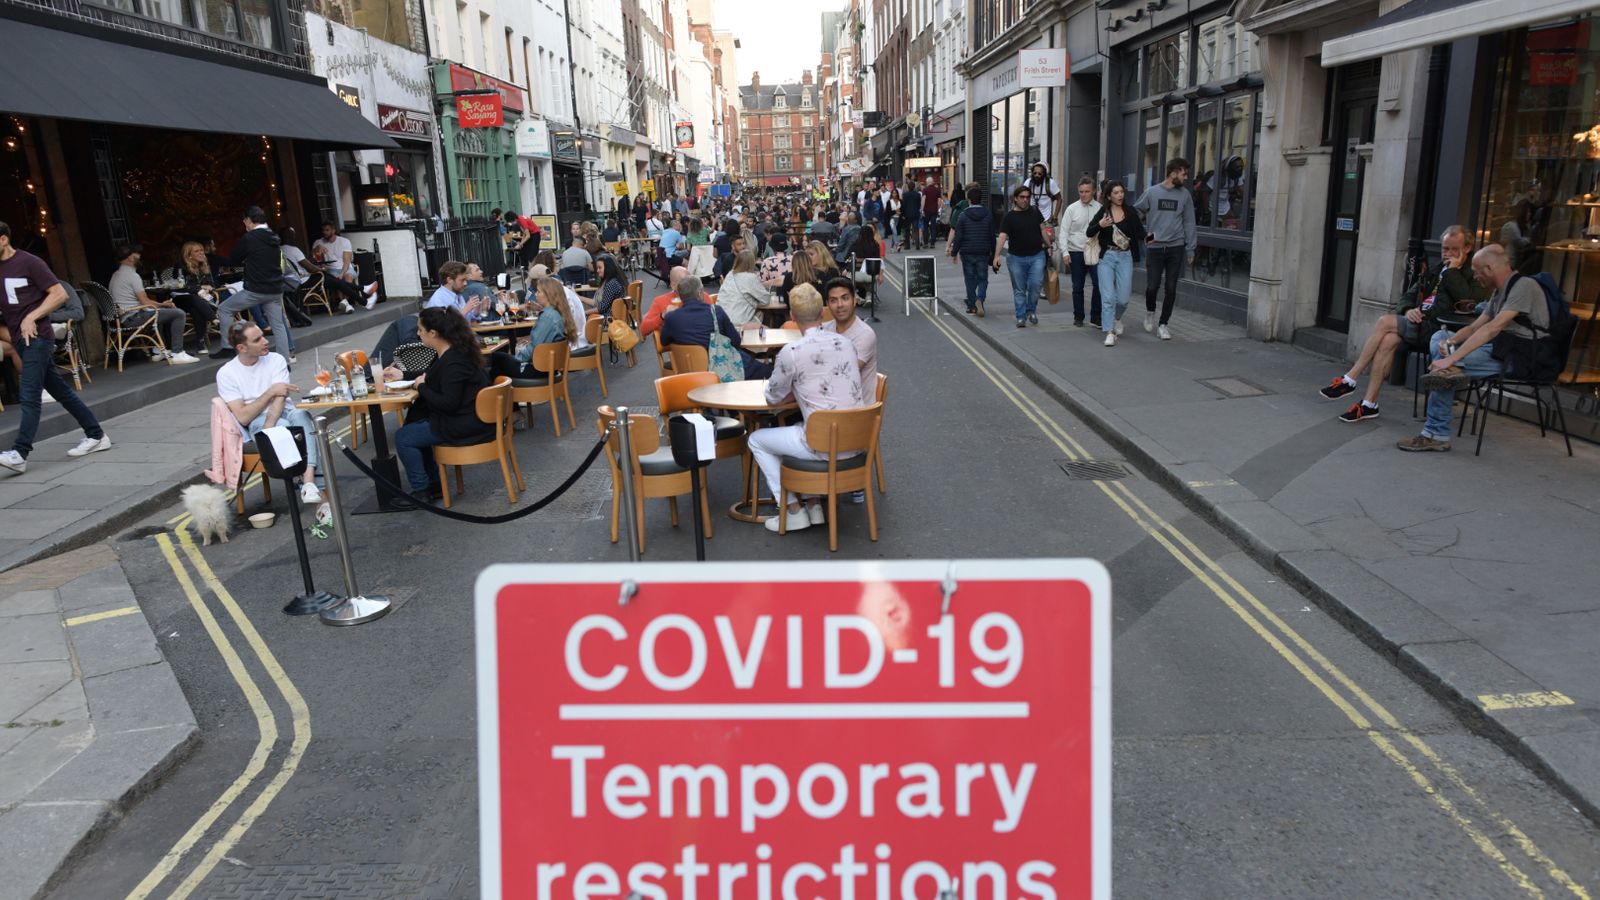 People socialising in Soho, central London, after the lifting of further coronavirus lockdown restrictions in England. Revellers are urged to remember the importance of social distancing as pubs gear up for the second weekend of trade since the lifting of lockdown measures.